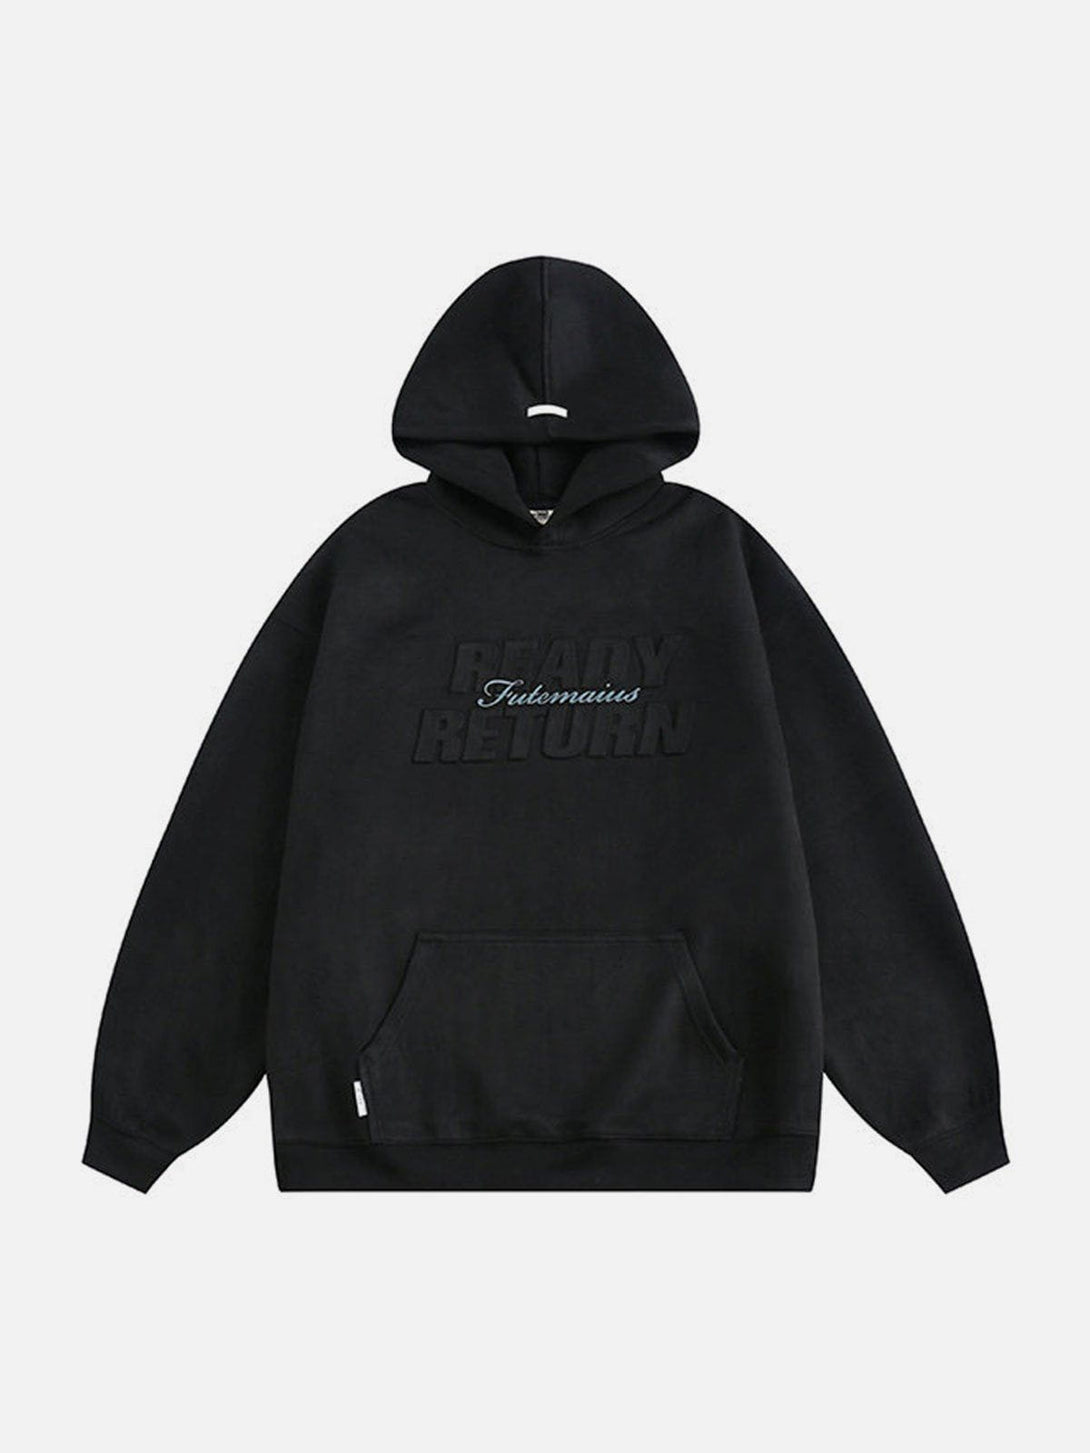 Levefly - Letter Print Solid Hoodie - Streetwear Fashion - levefly.com